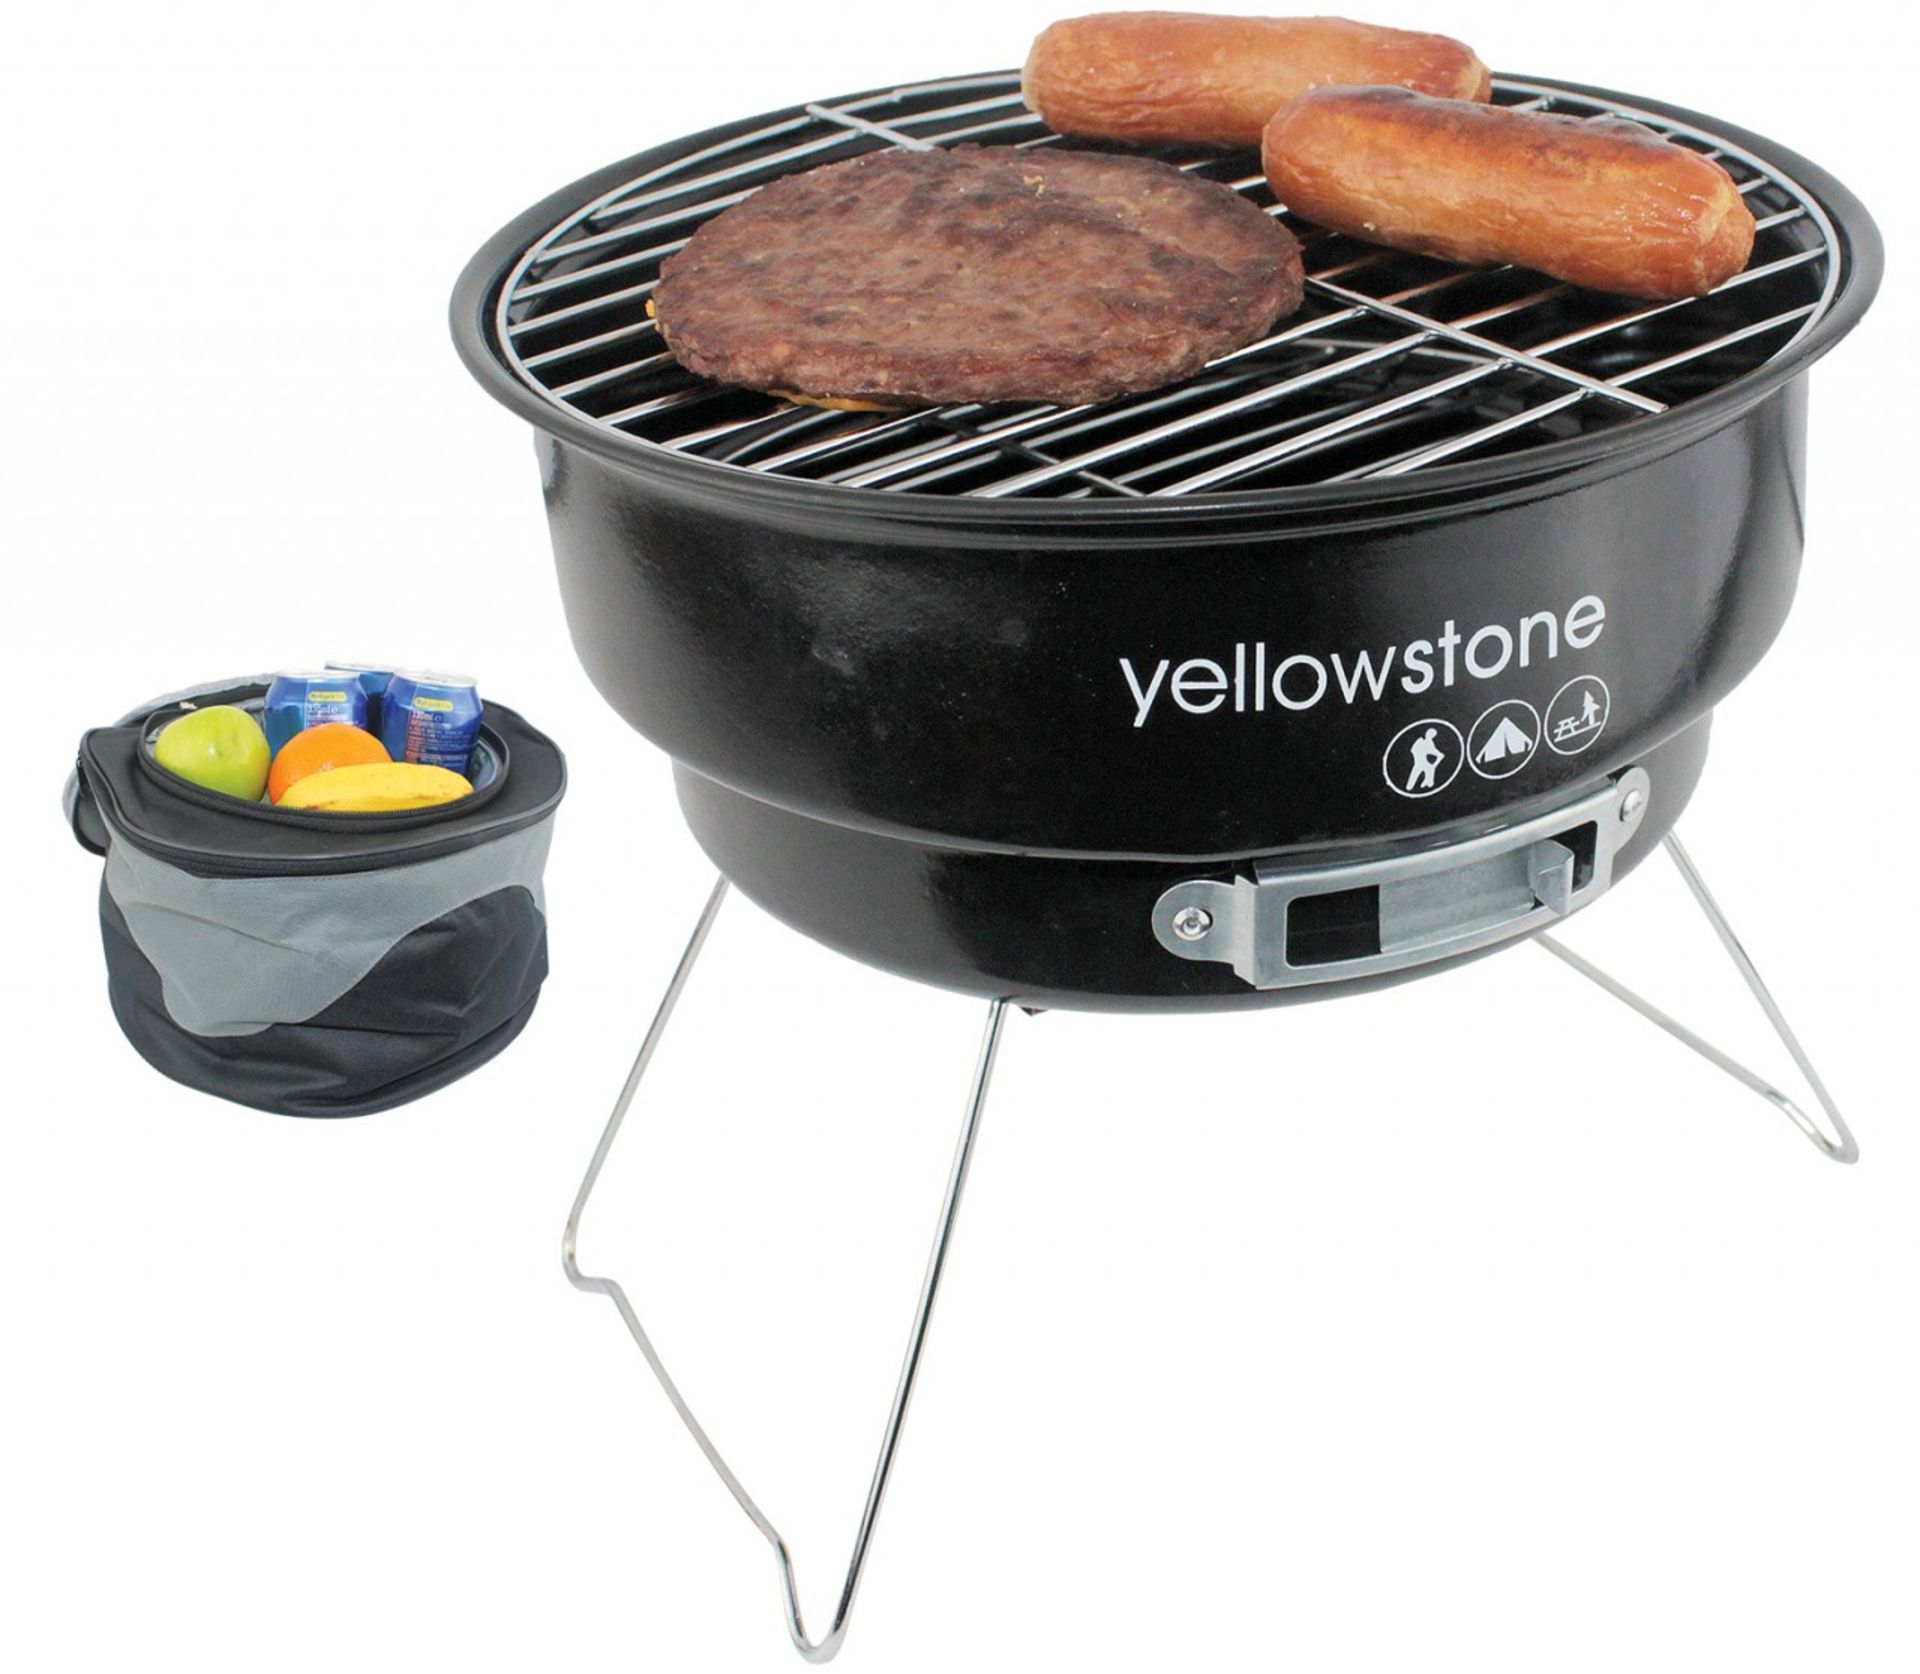 V Grade C Round Folding BBQ with Cooler Bag - Enamelled Steel Fire Bowl with Built In Vents -